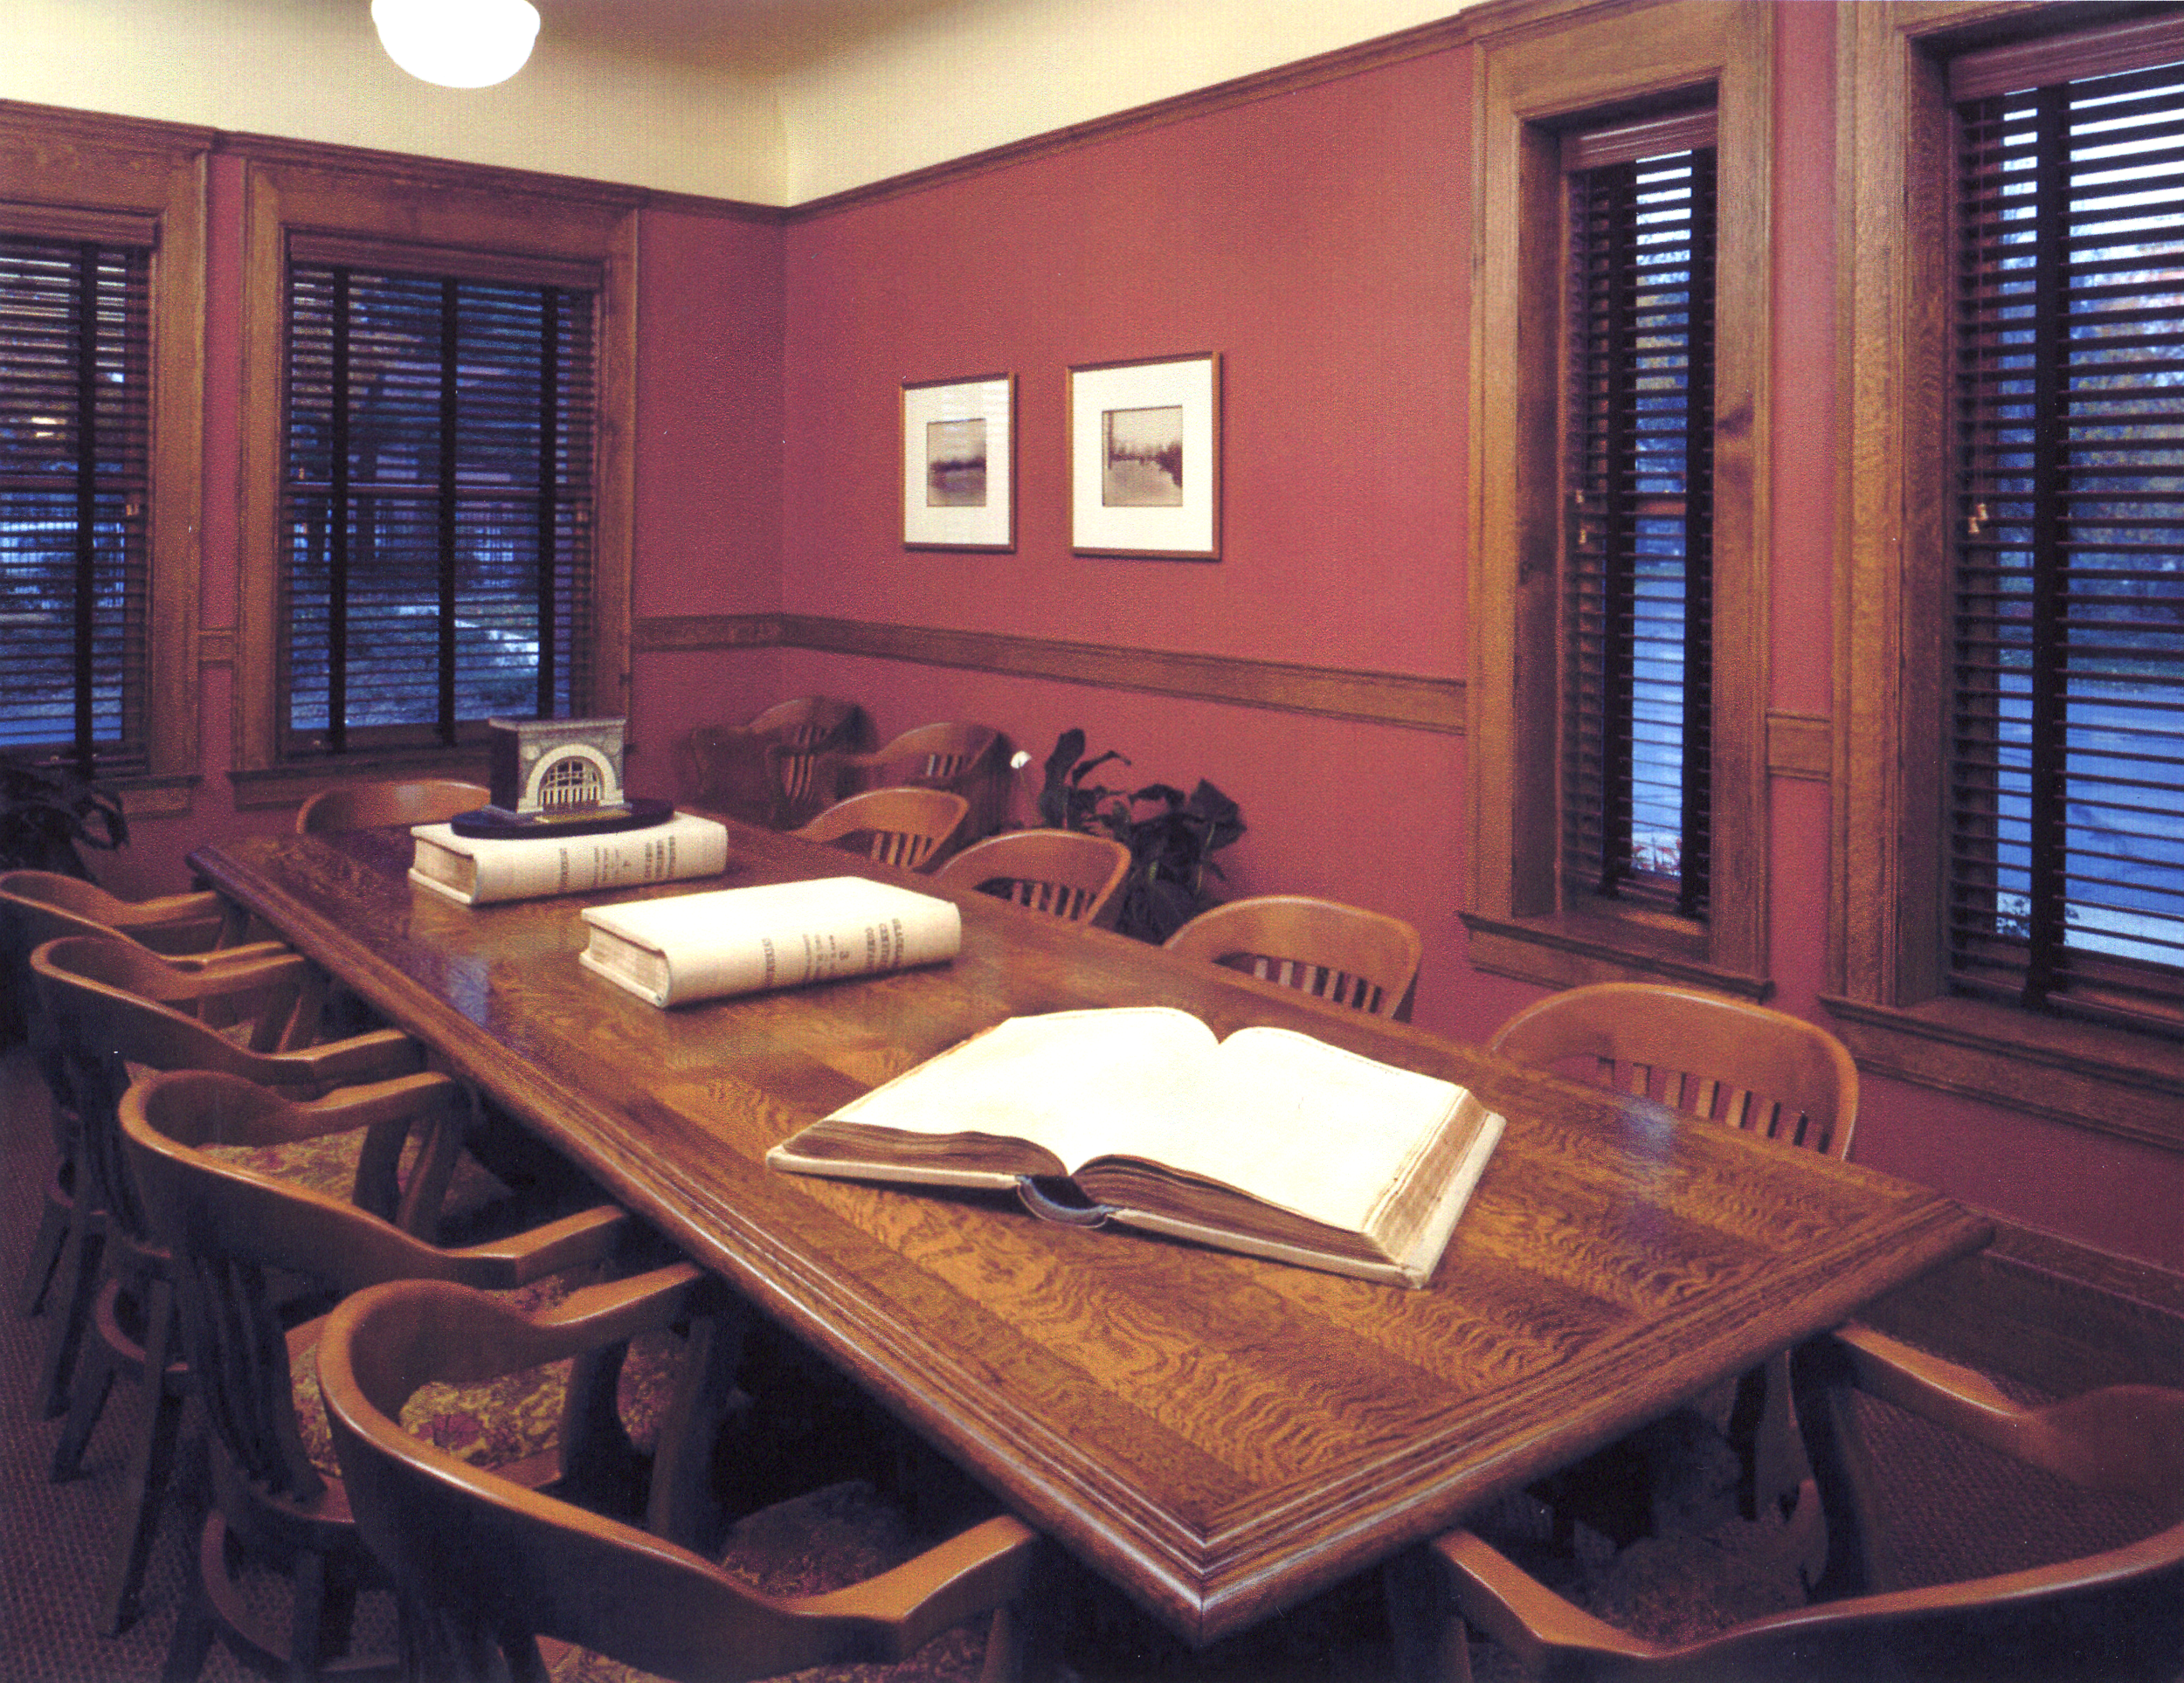 Chicago Historic Graceland Cemetery Conference Room